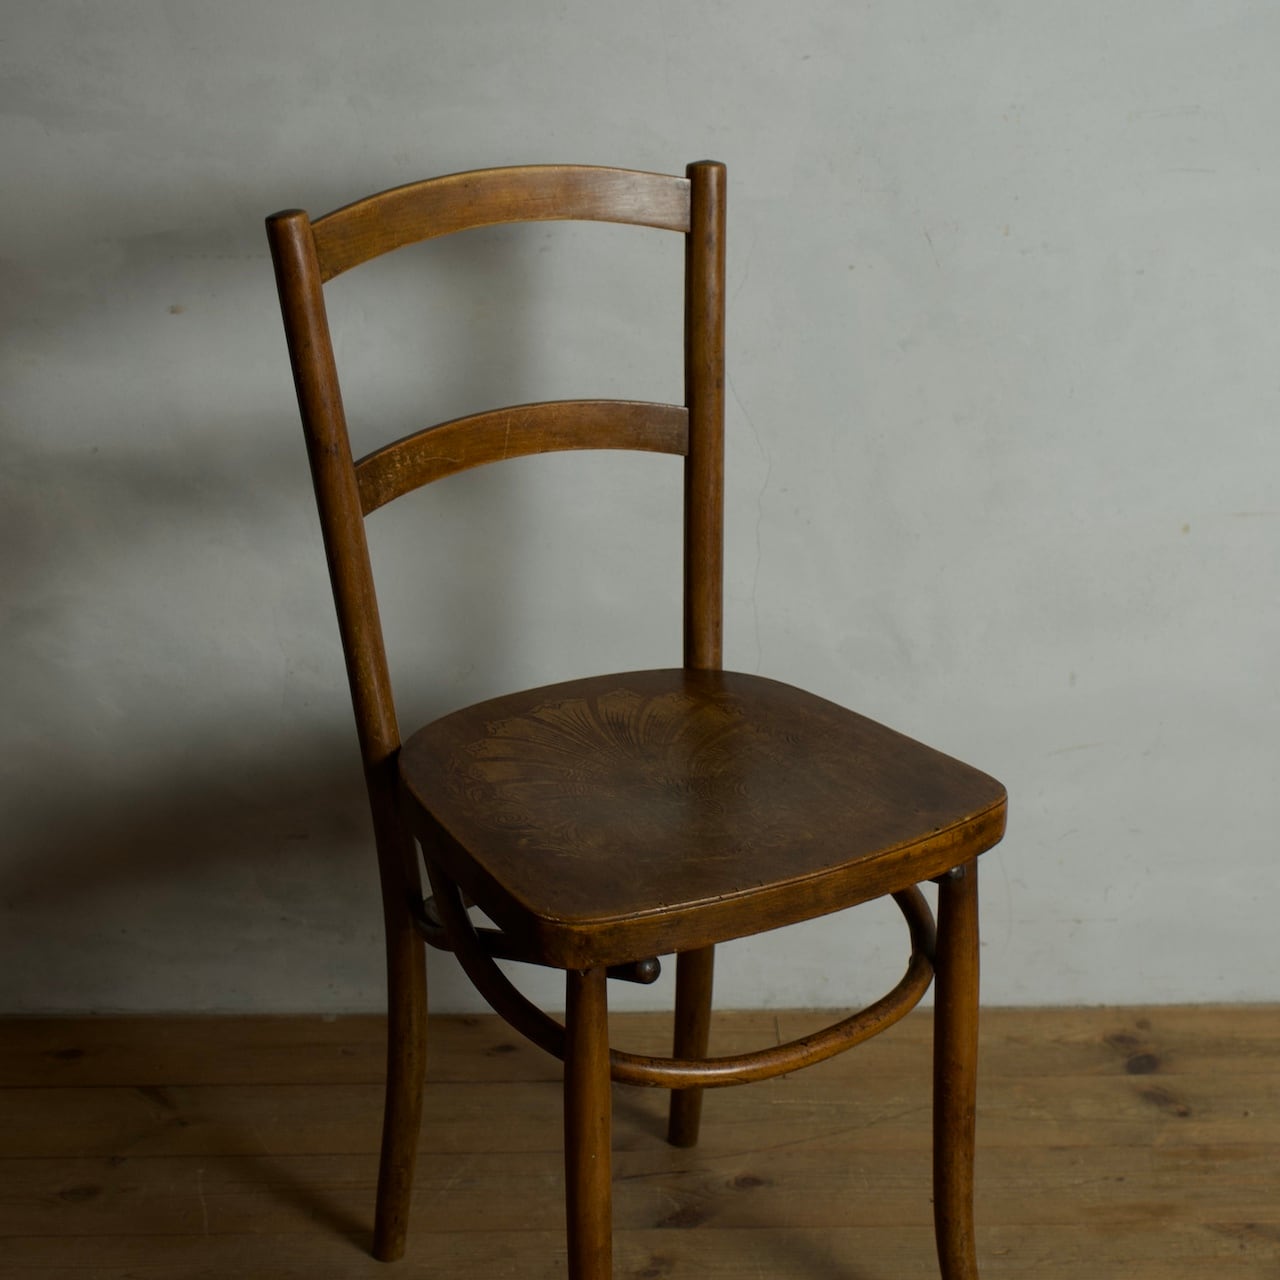 Bentwood Chair / ベントウッド チェア〈チェア・椅子・ダイニング